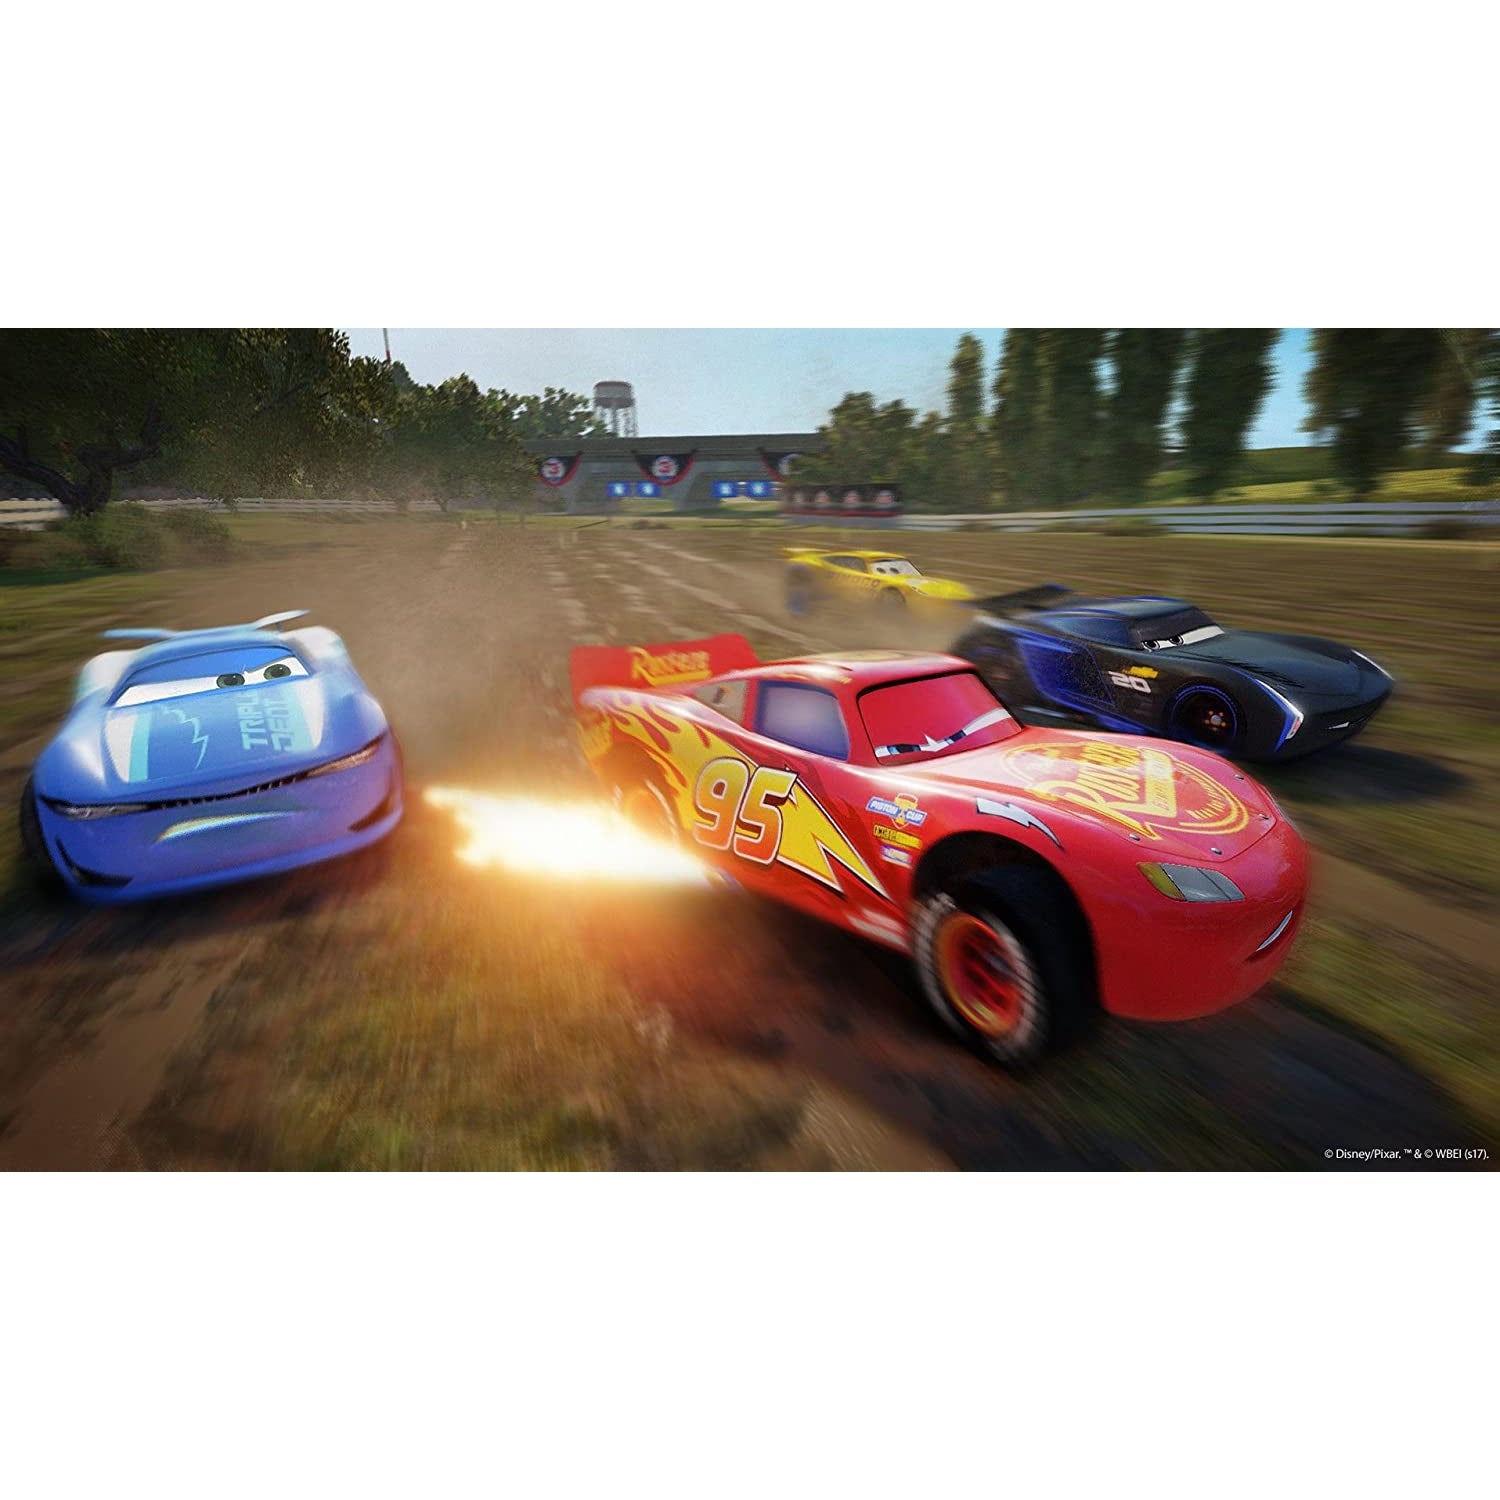 Cars 3 Driven To Win (Xbox One)